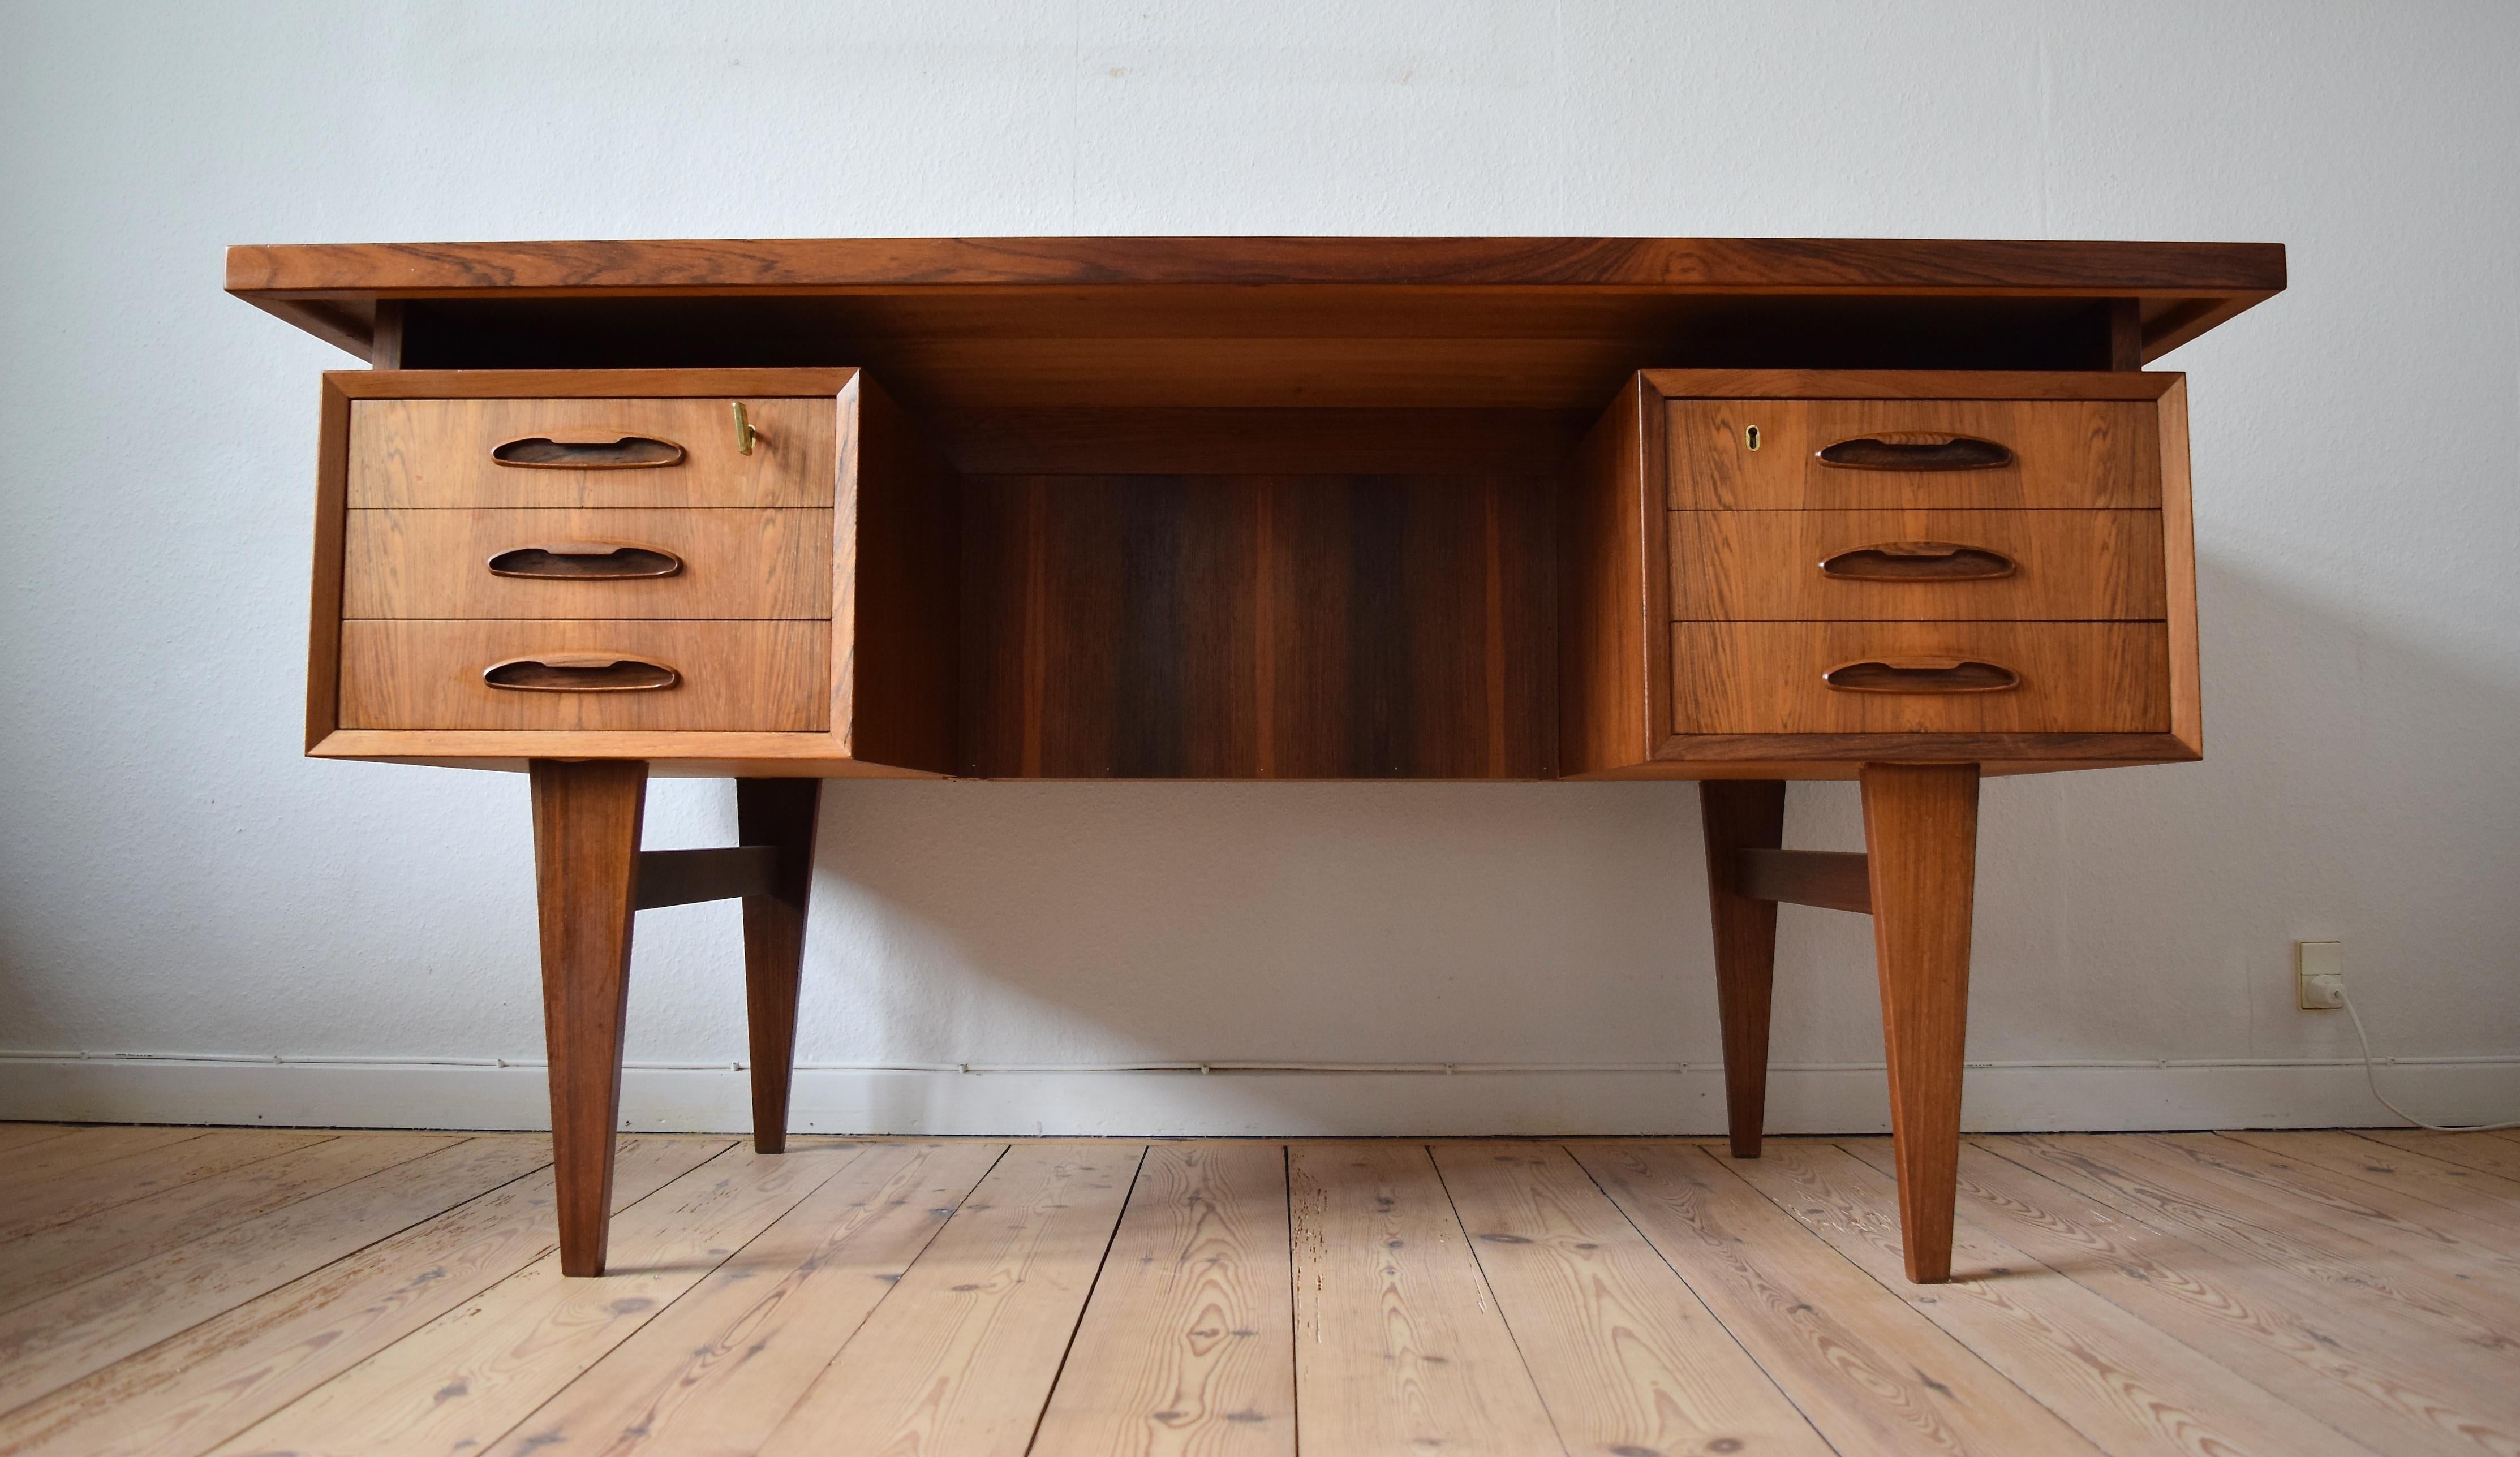 Rosewood floating desk manufactured in Denmark in the 1960s. This freestanding desk features a floating top with six drawers on the front, two lockable(keys included). Three bookcase sections on the rear with bevelled edges. The construction